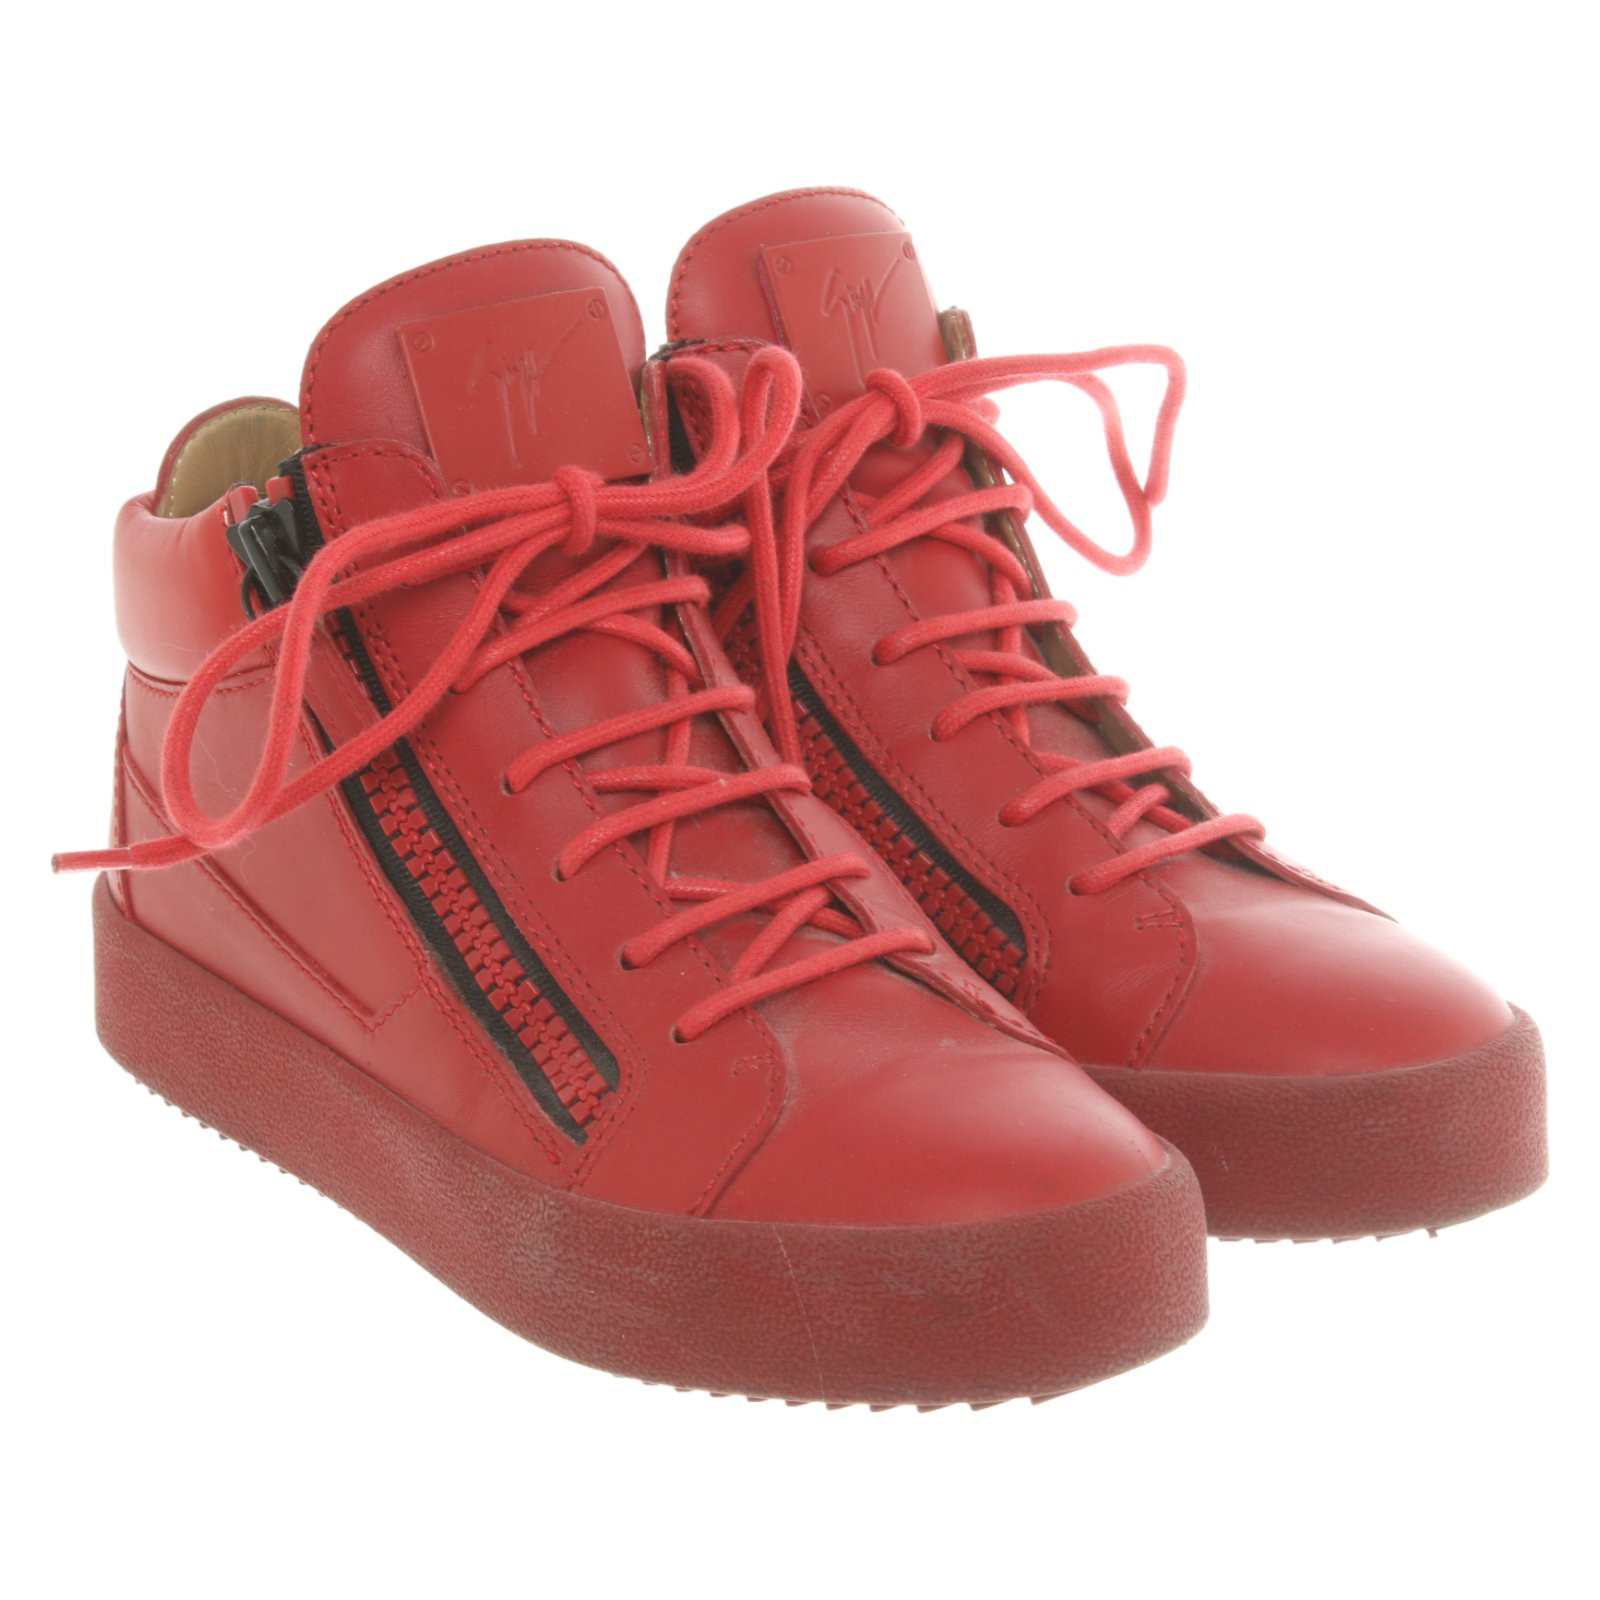 Giuseppe Zanotti Trainers Leather in Red - Second Hand Giuseppe Zanotti Trainers Leather Red buy used for 200€ (4409398)